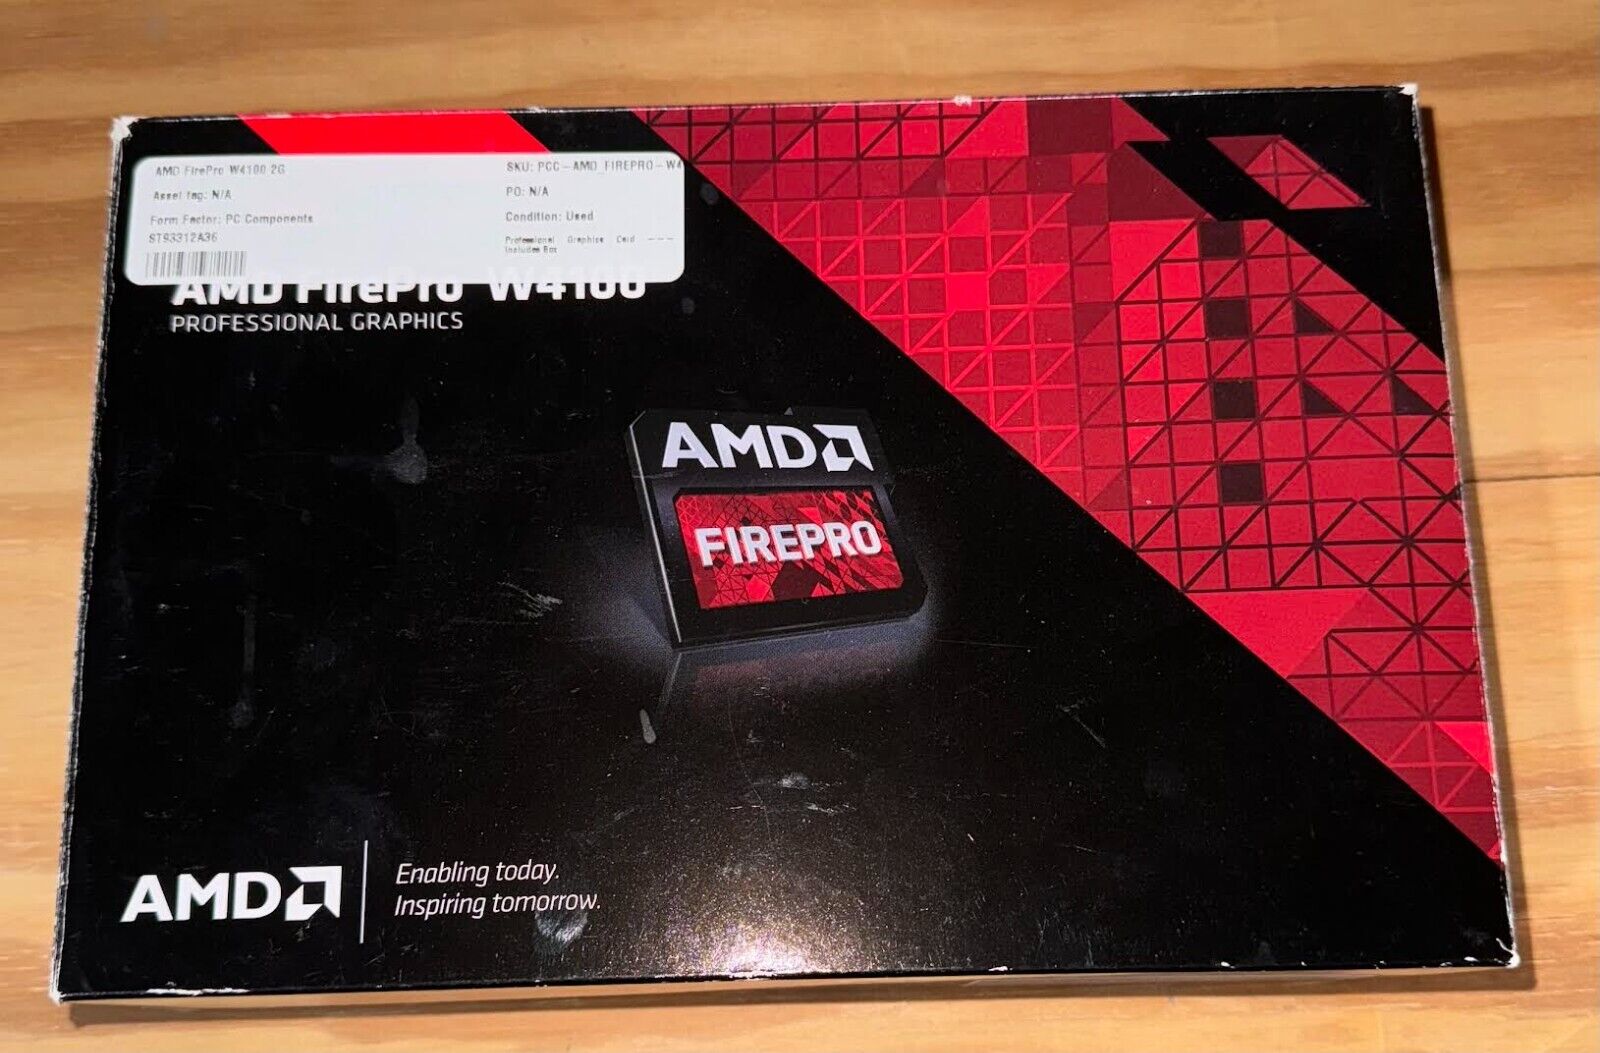 AMD FirePro W4100 2G Graphics Video Card - Includes Box